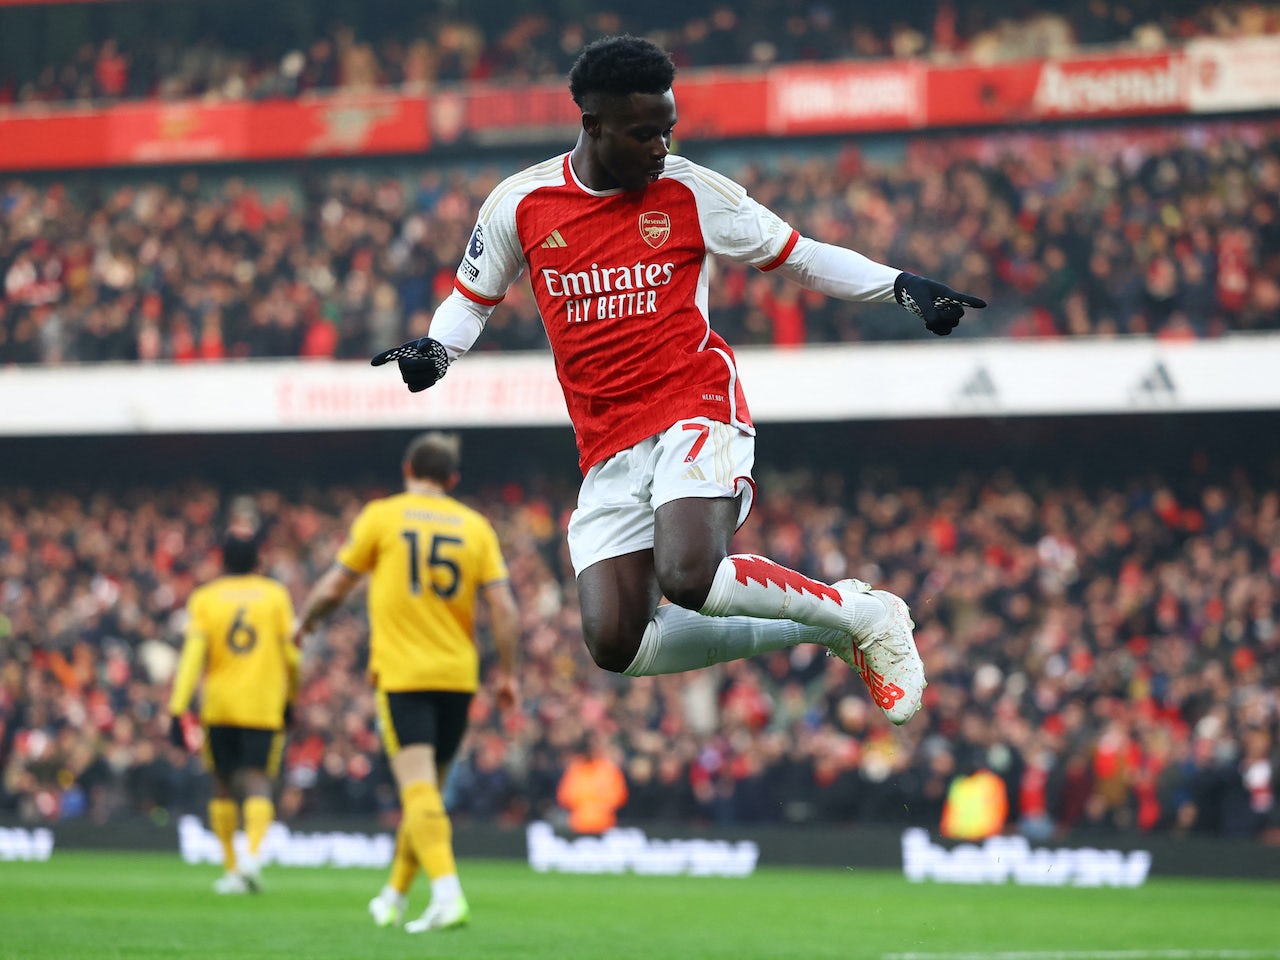 Arsenal beat Wolverhampton Wanderers to go four points clear at top of table